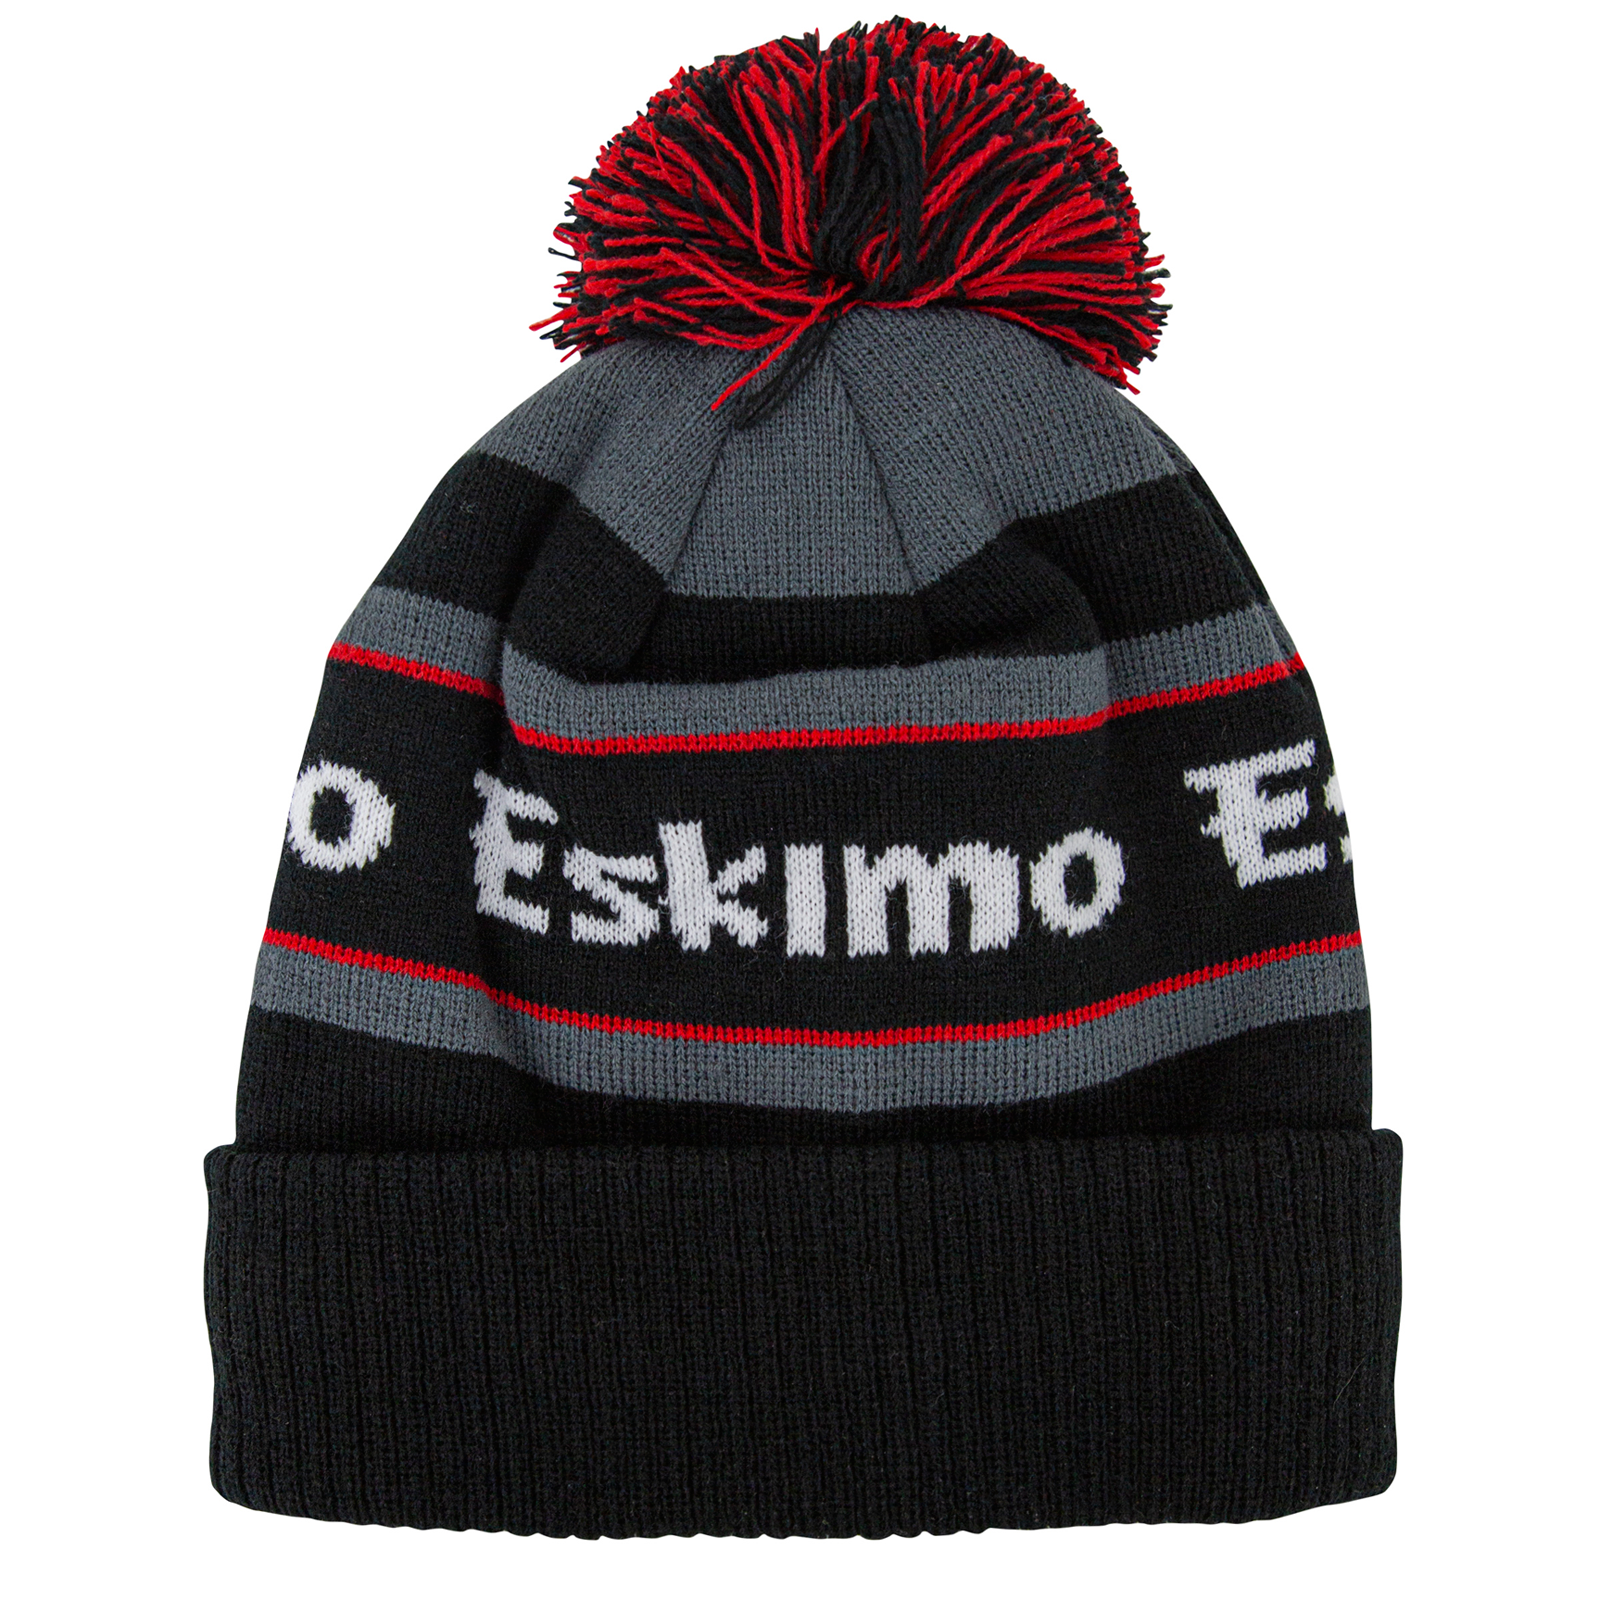 Eskimo-Ice Fishing Perfect Gift Cap for Sale by Hongterry